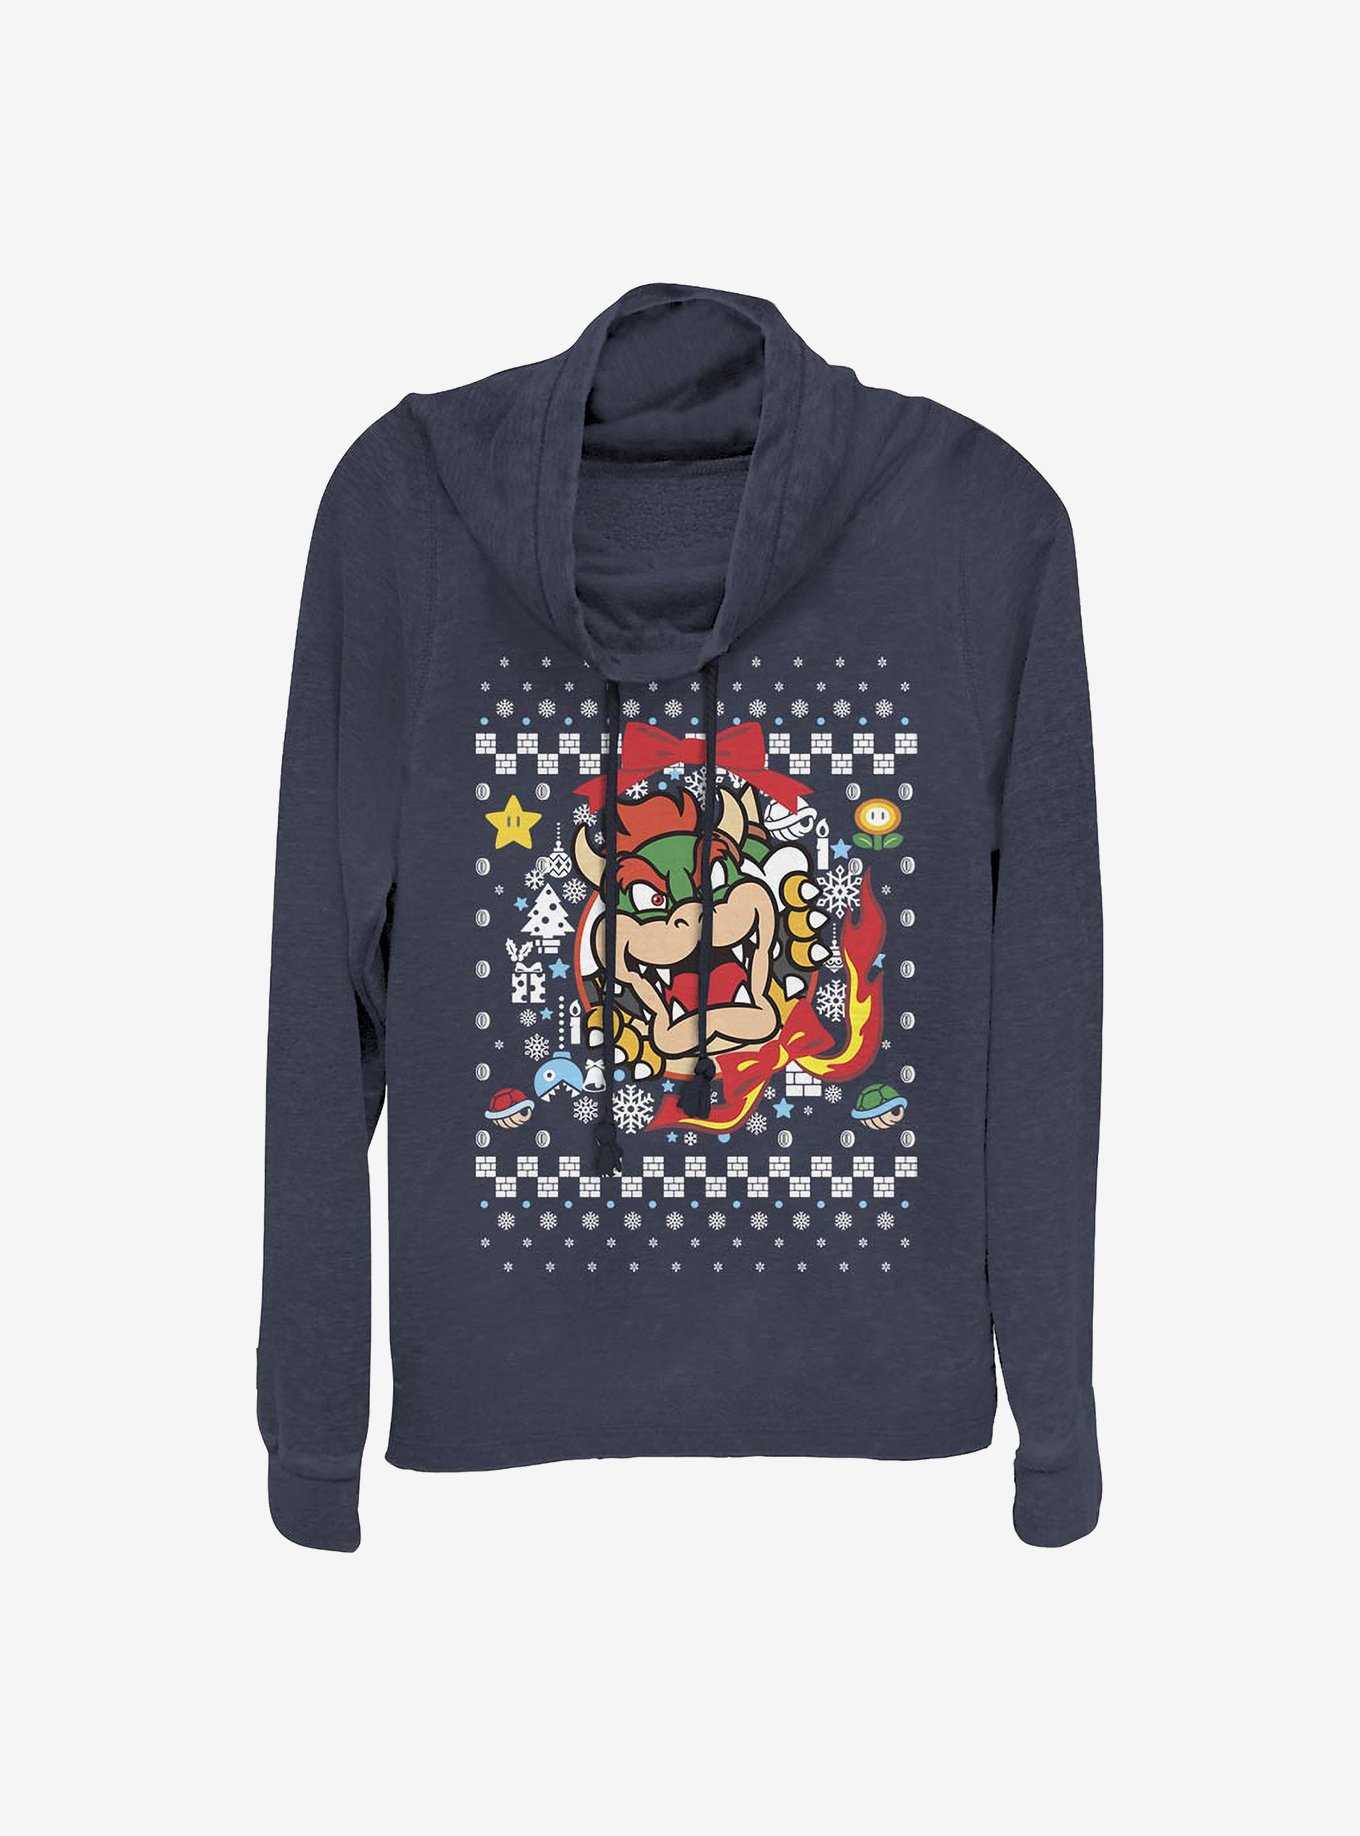 Super Mario Bowser Wreath Ugly Christmas Sweater Cowl Neck Long-Sleeve Girls Top, , hi-res